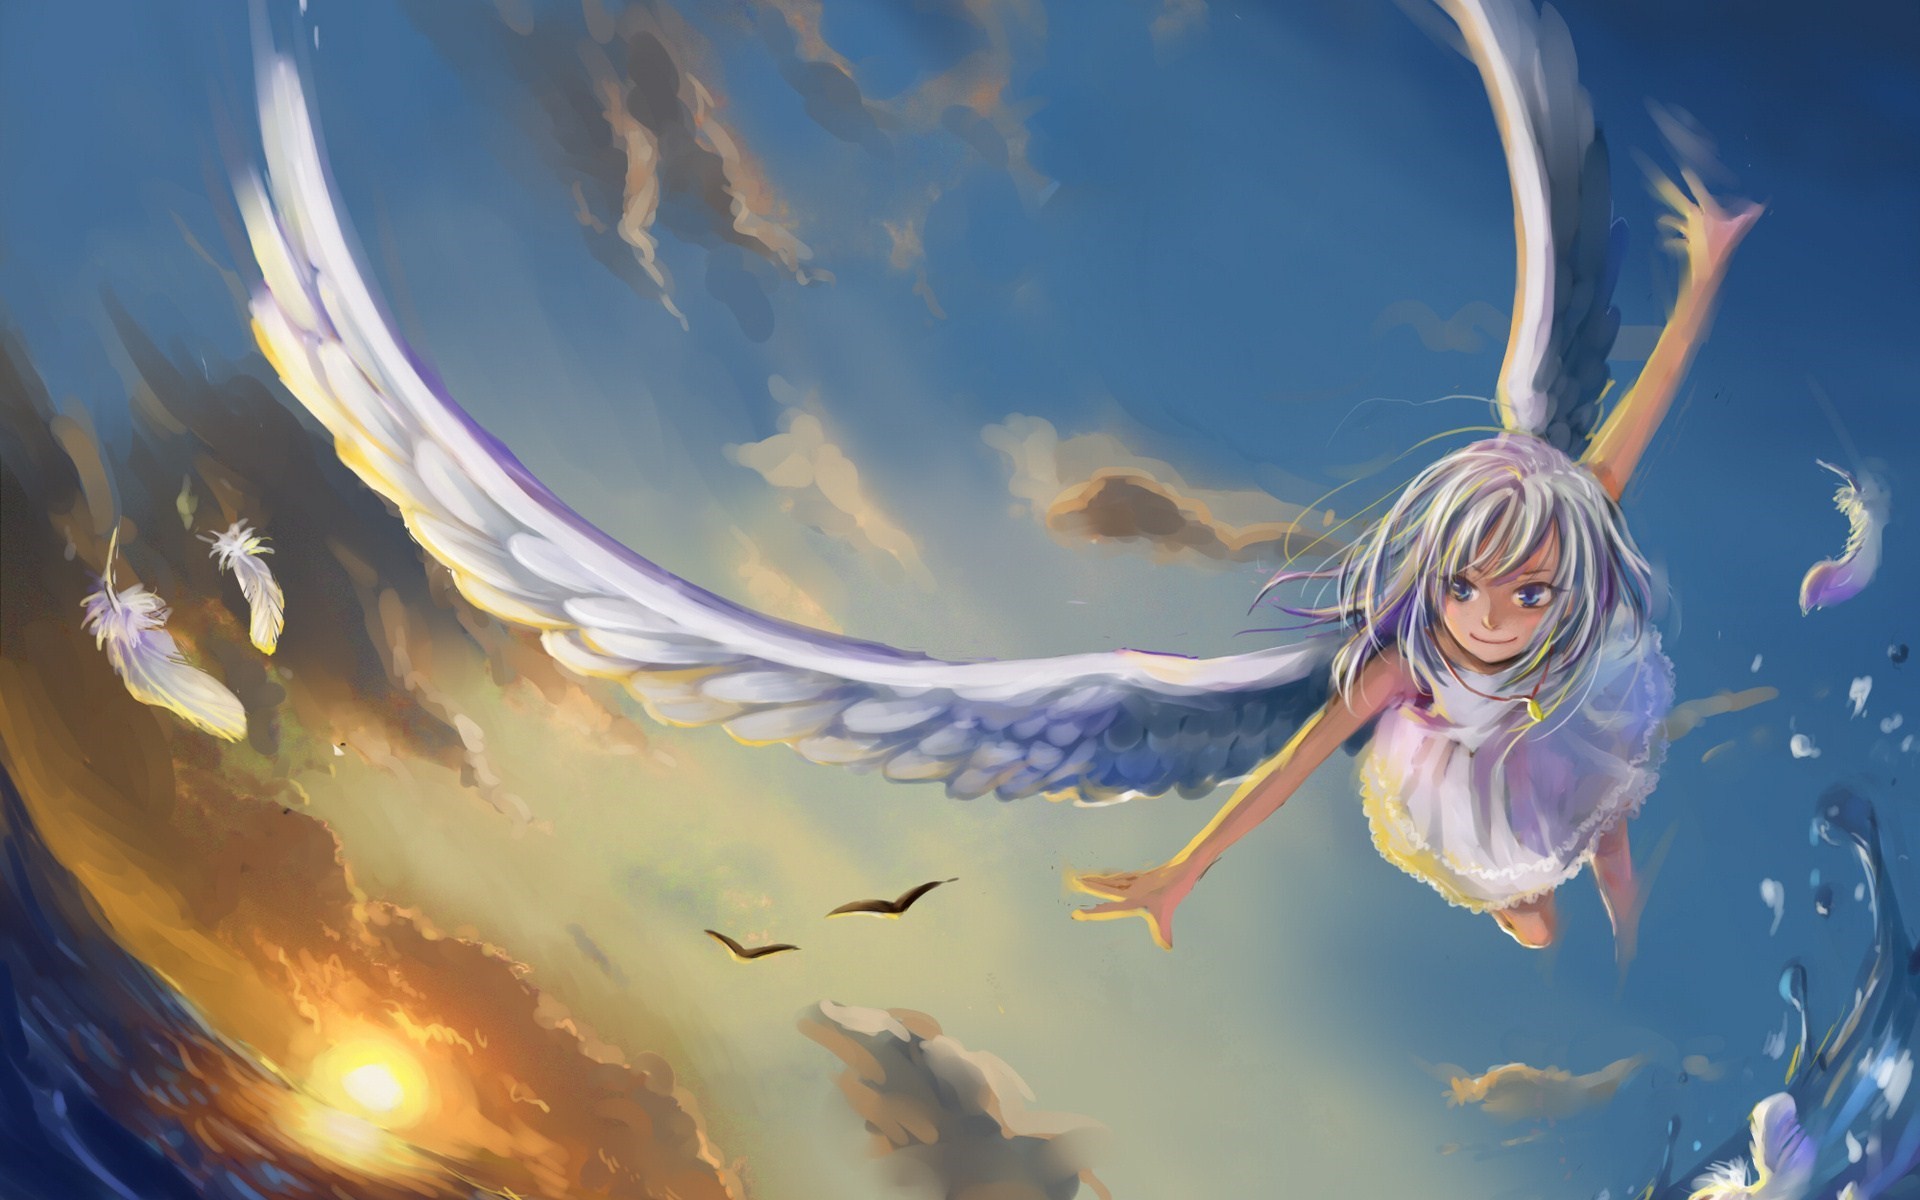 Anime Girl With Wings Flying - HD Wallpaper 